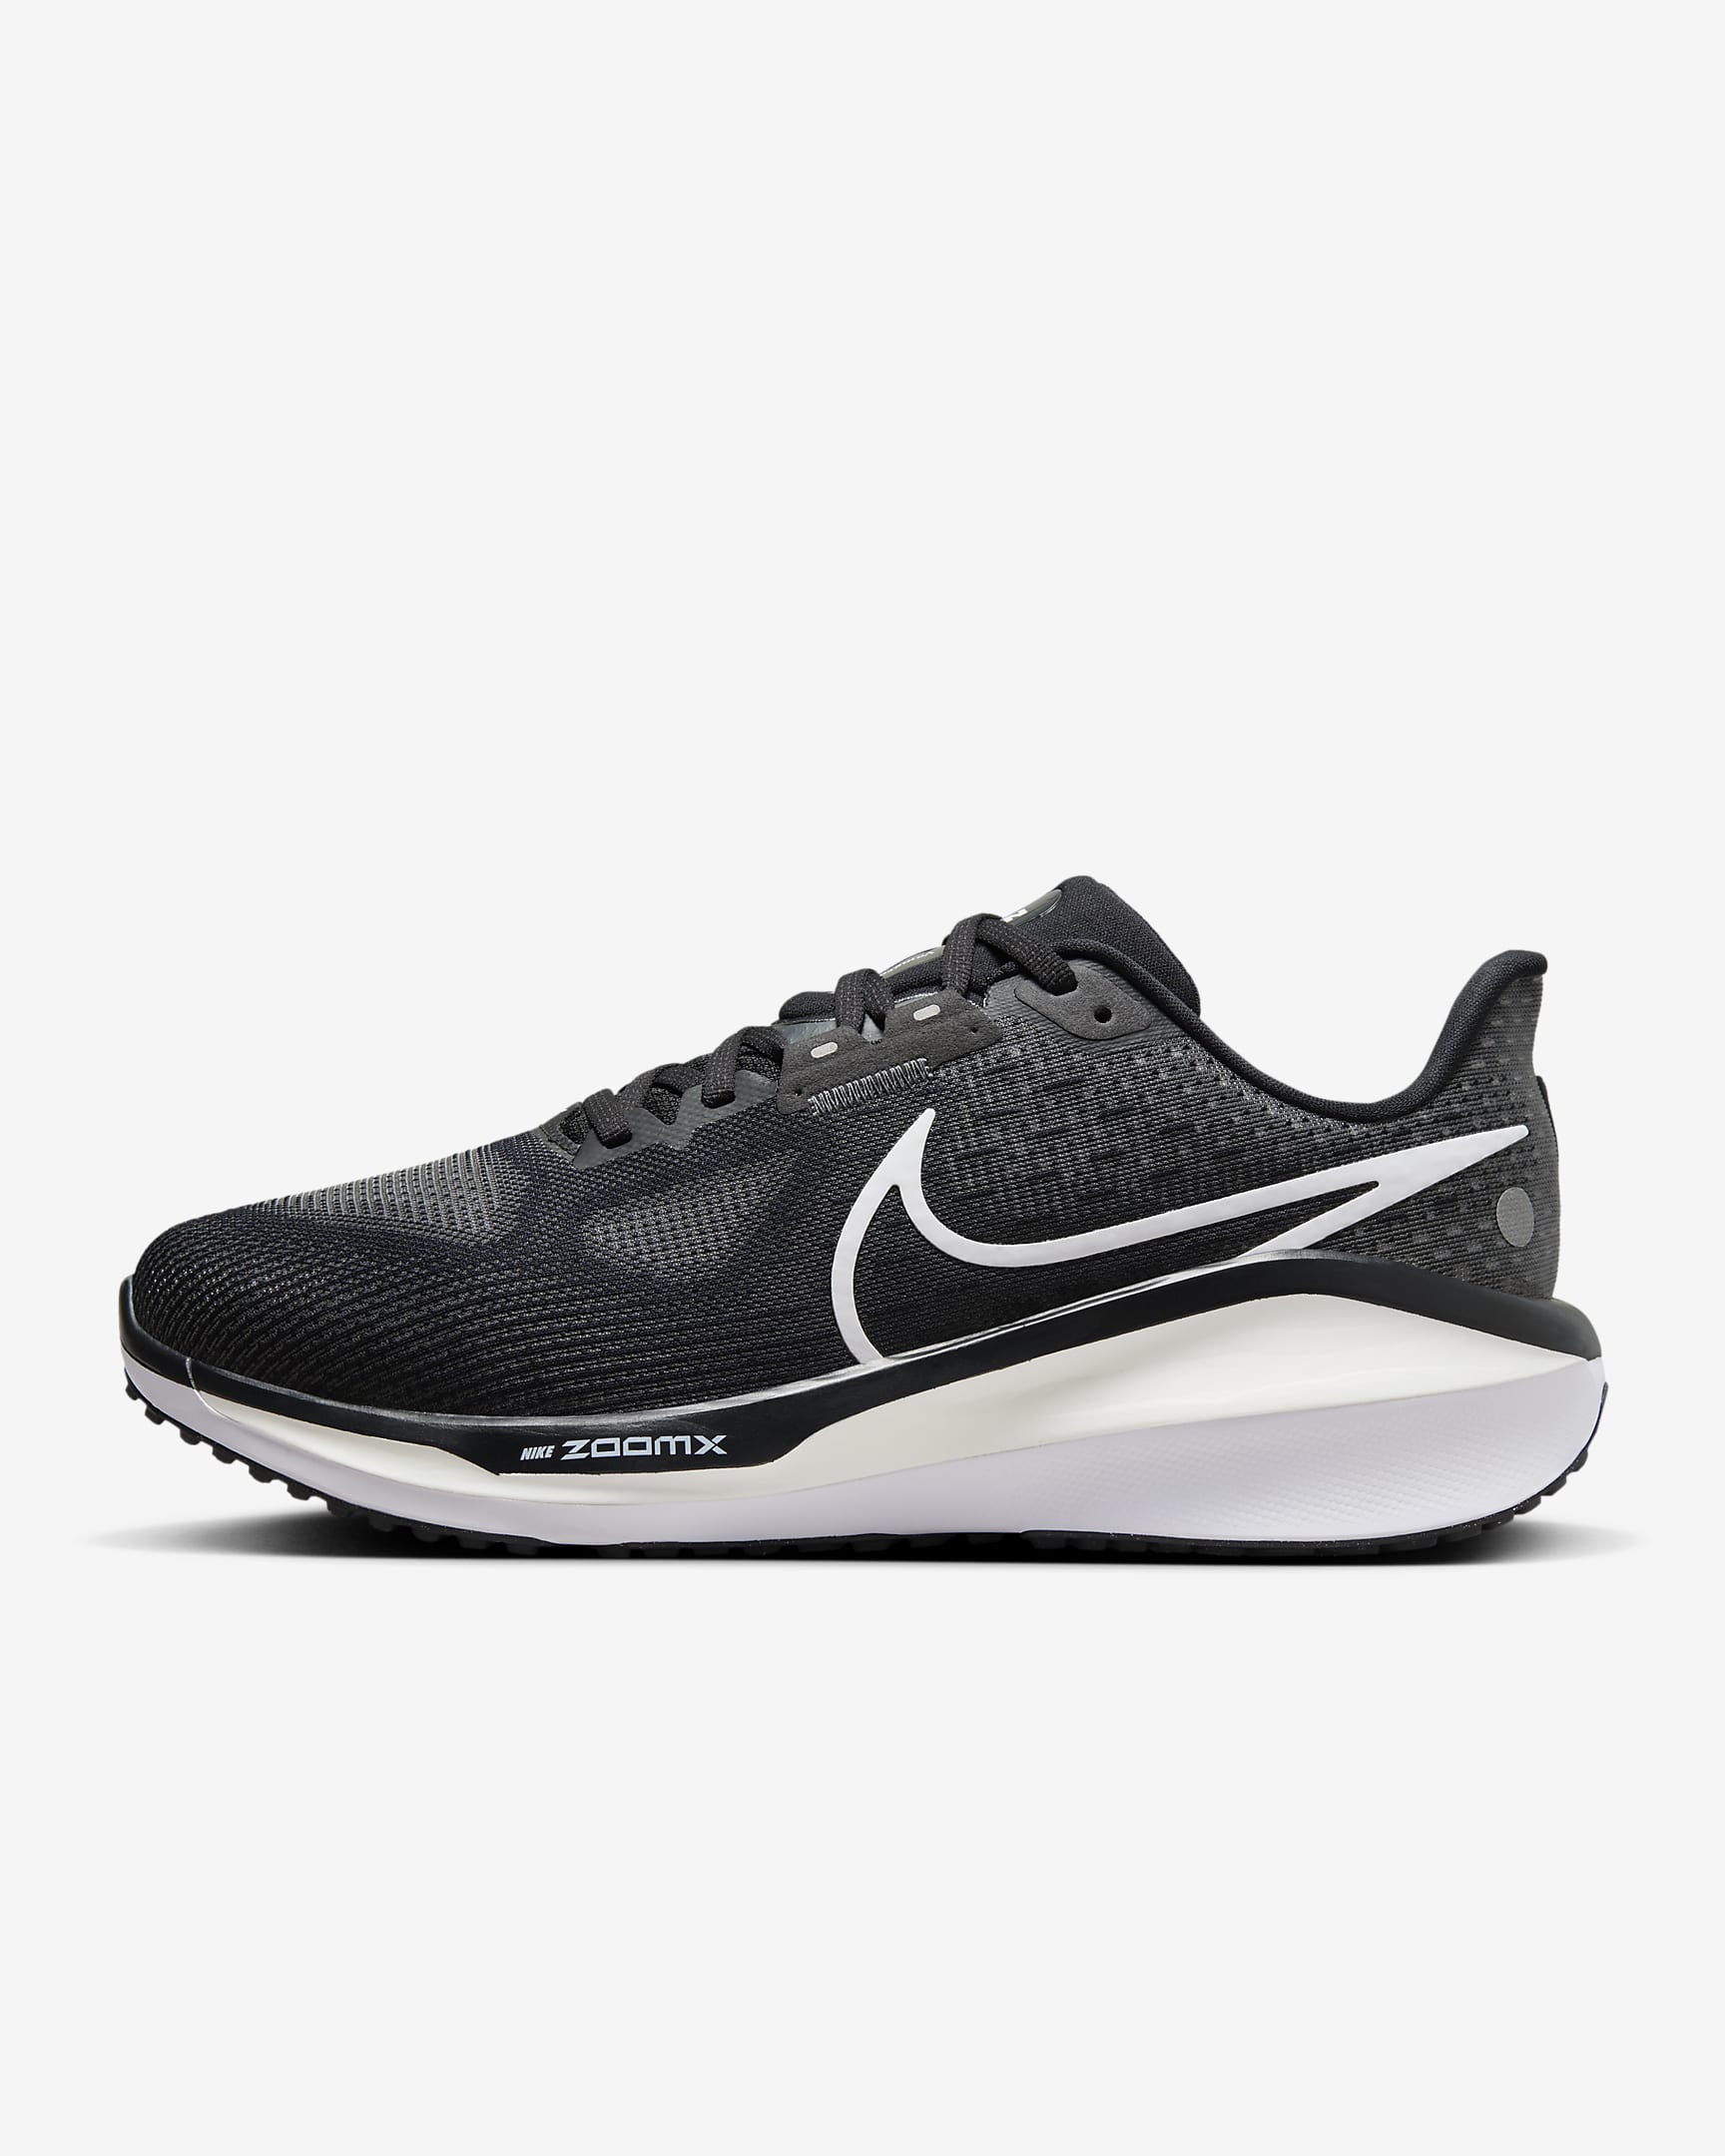 Nike Vomero 17 Men's Road Running Shoes (Extra Wide). Nike ZA